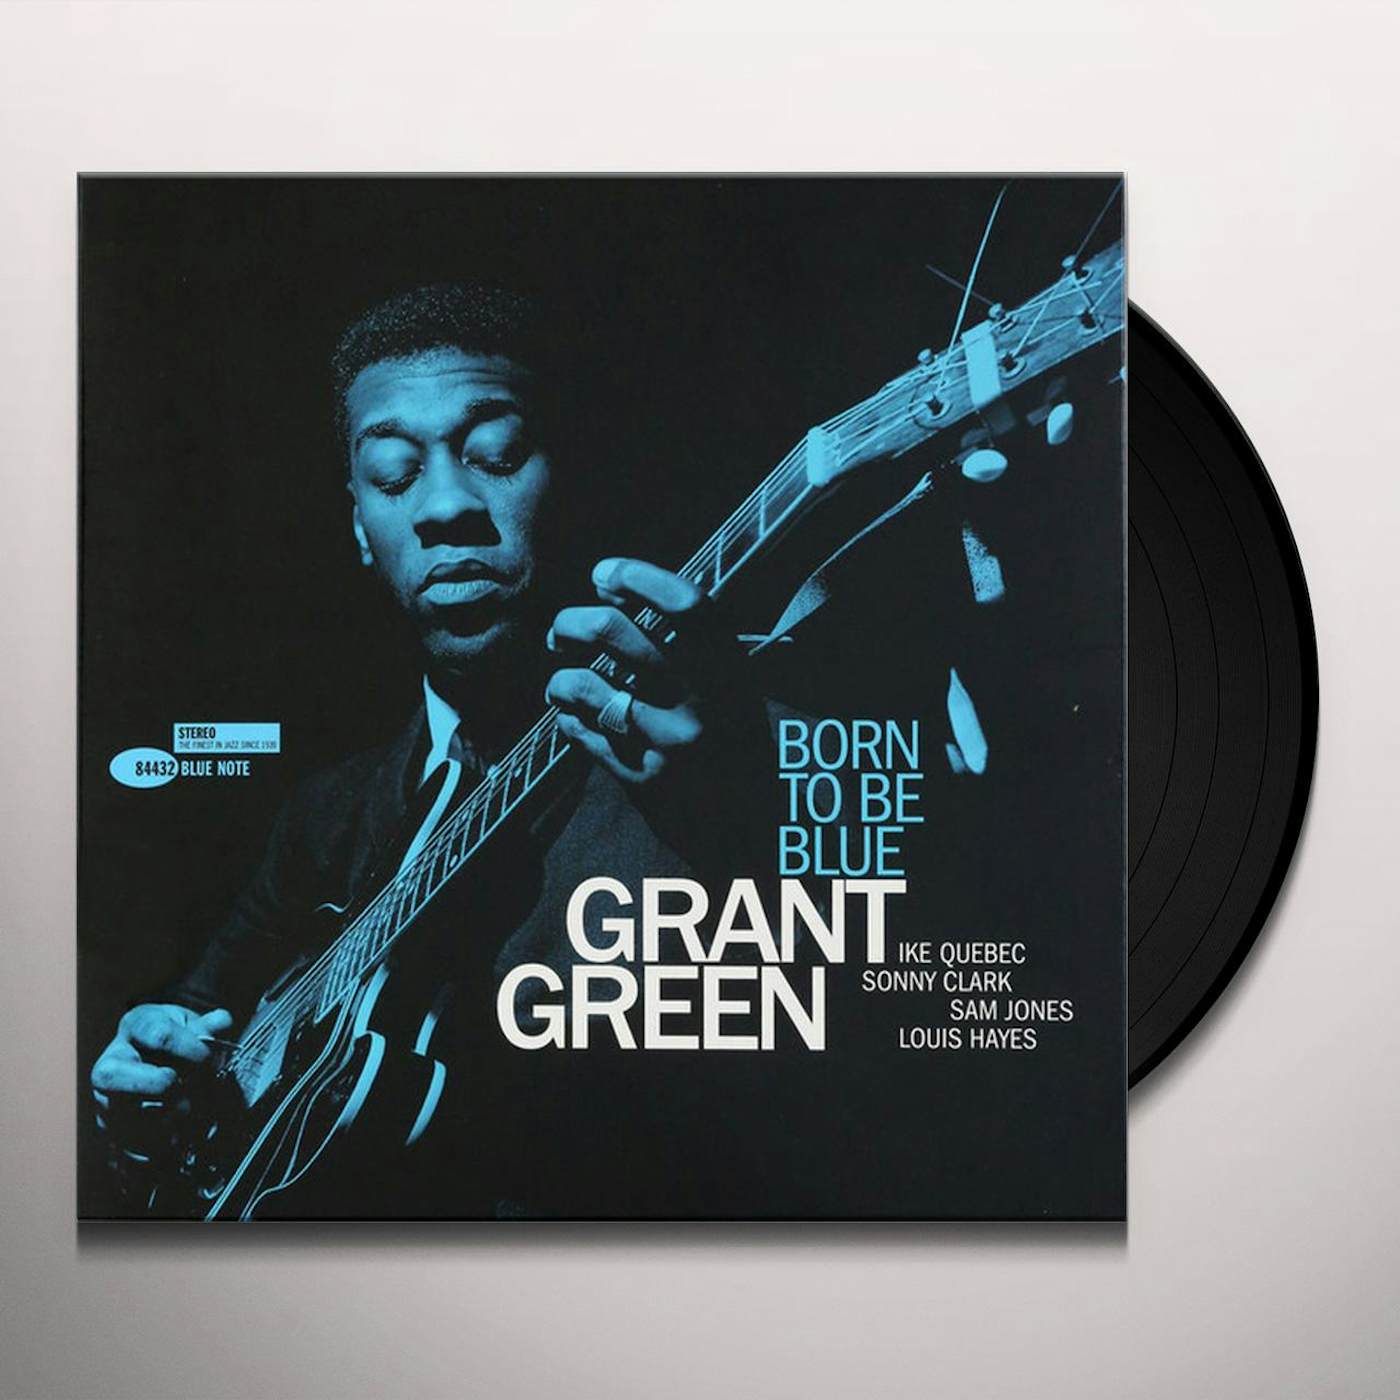 Grant Green BORN TO BE BLUE (BLUE NOTE TONE POET SERIES) Vinyl Record